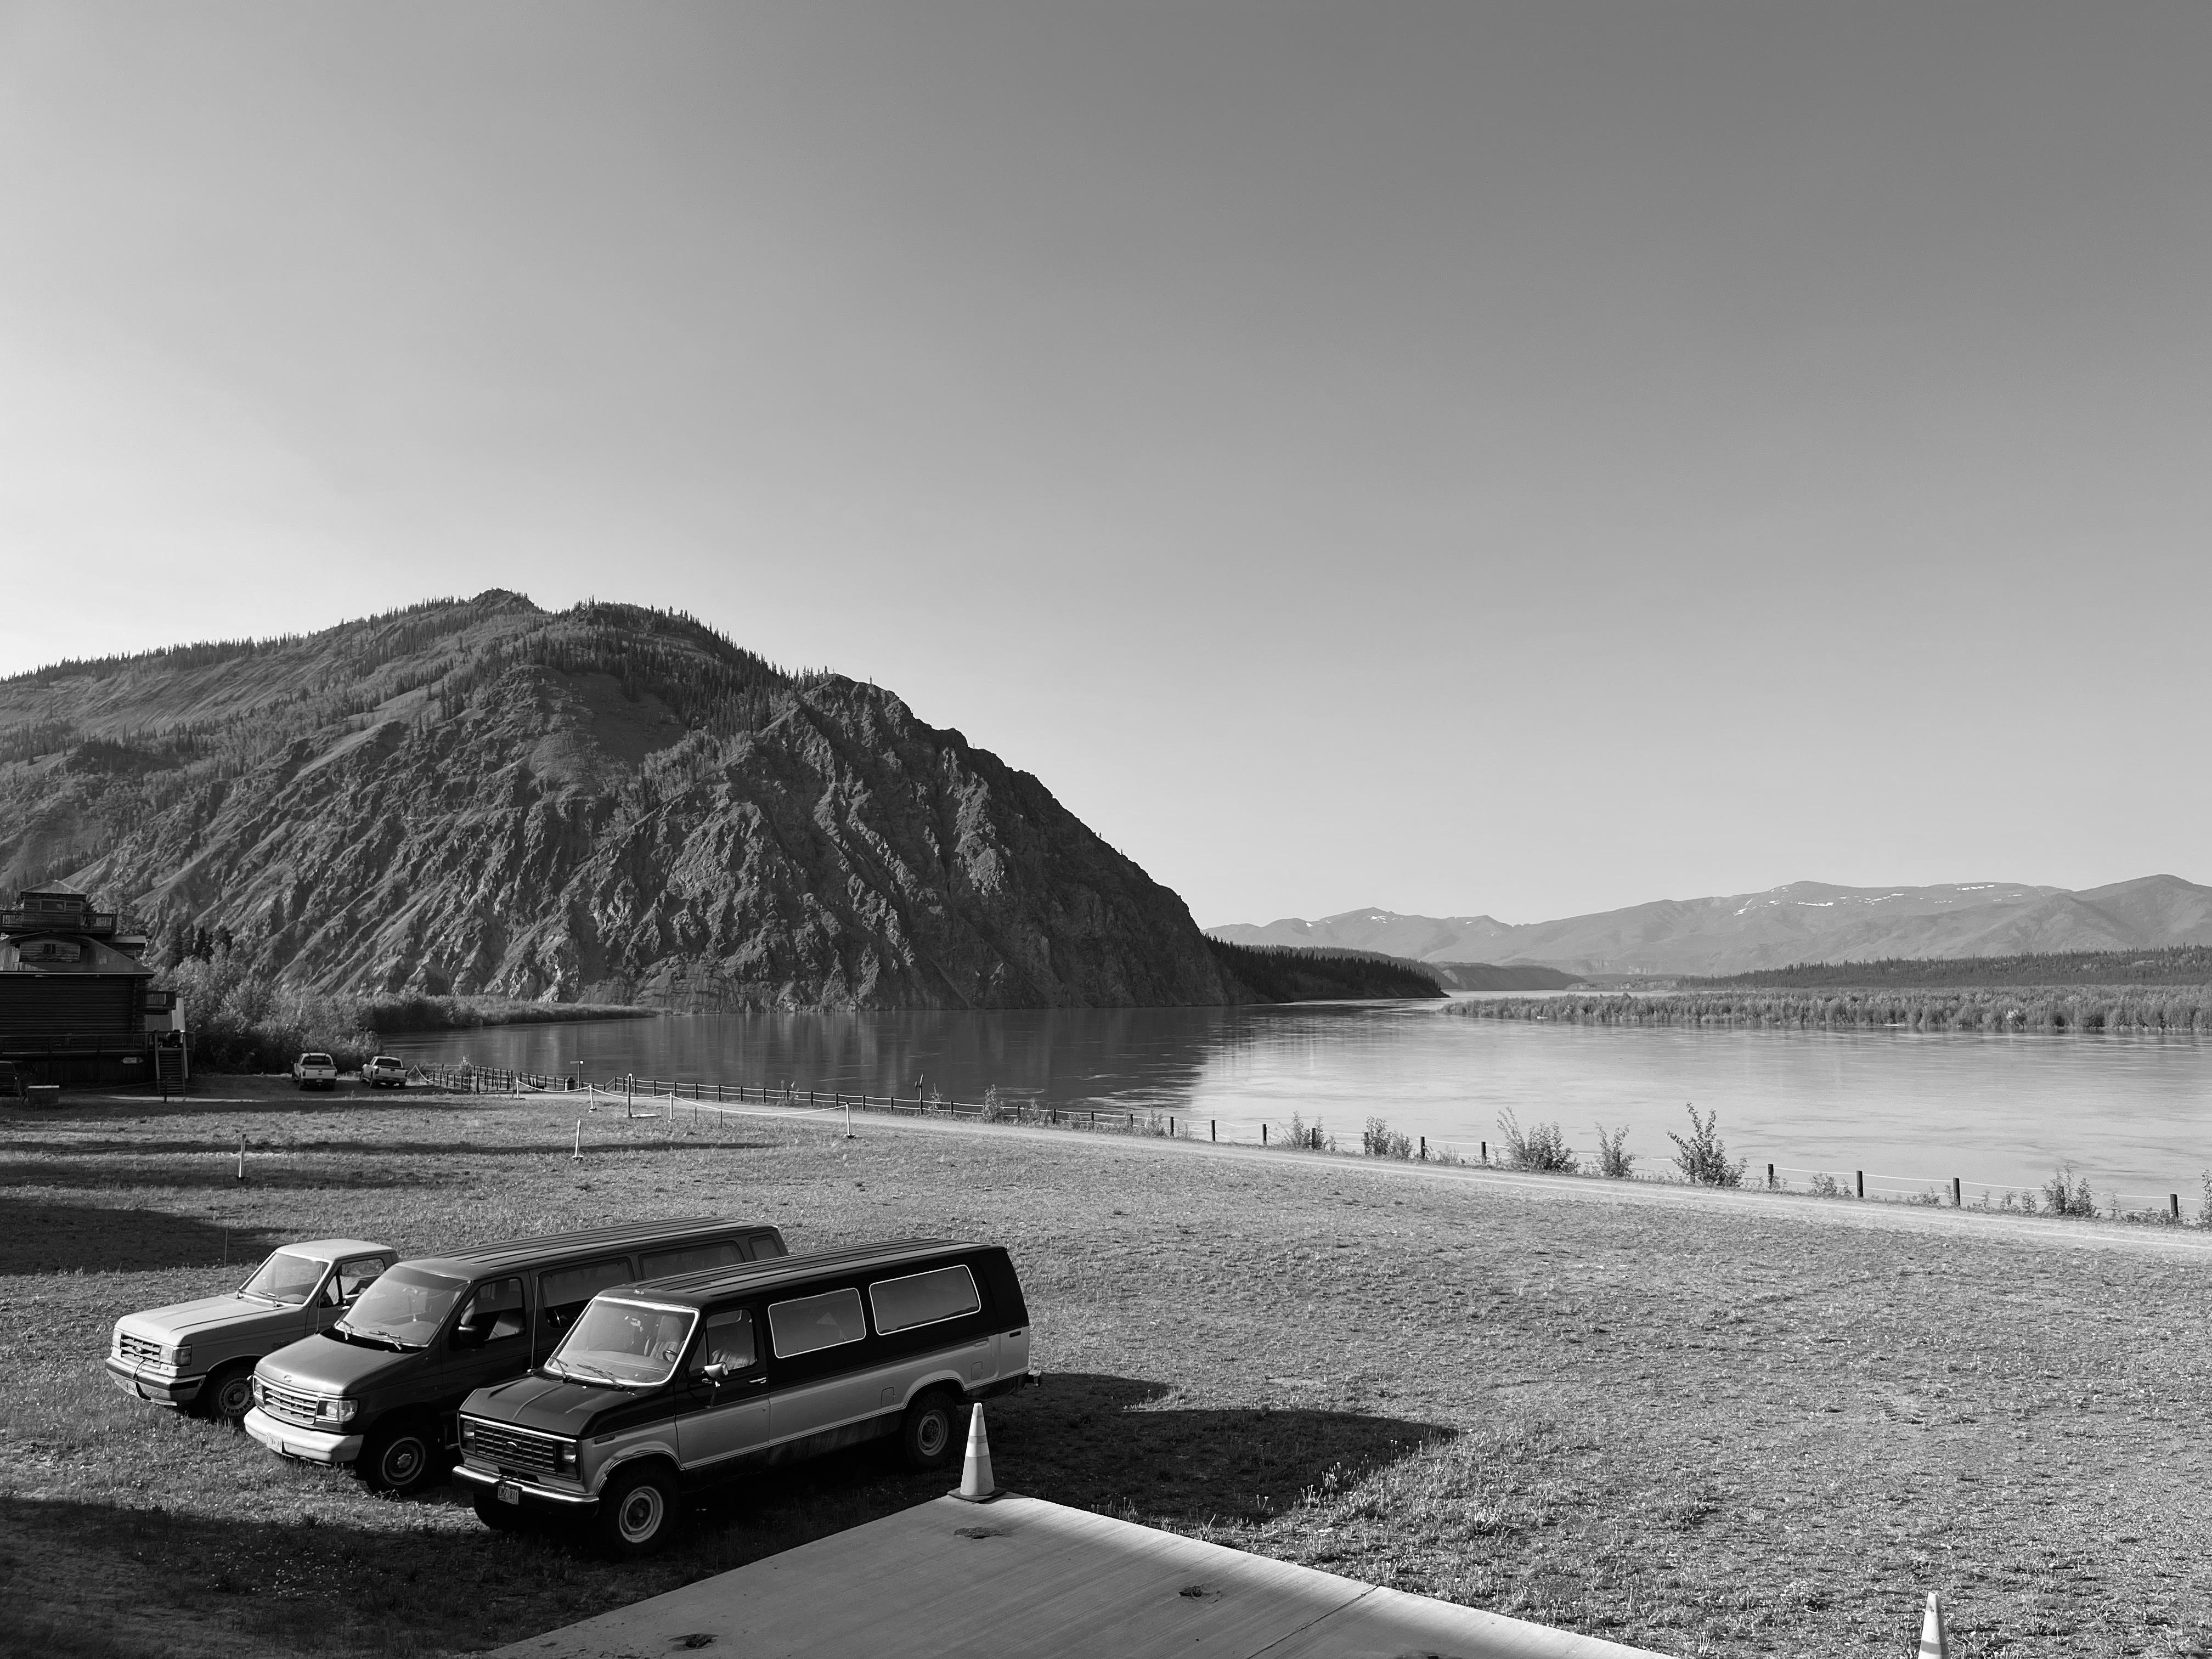 A black and white photo. A nearly empty, grassy parking lot abuts against a wide, calm river. The river bends against a rocky mountain dotted with evergreens and flows into the horizon towards a distant mountain range. A truck and two vans are tucked into the left side of the parking lot, and lend the photo a sense of being taken out of time because they are in good condition, but with a decades old style.